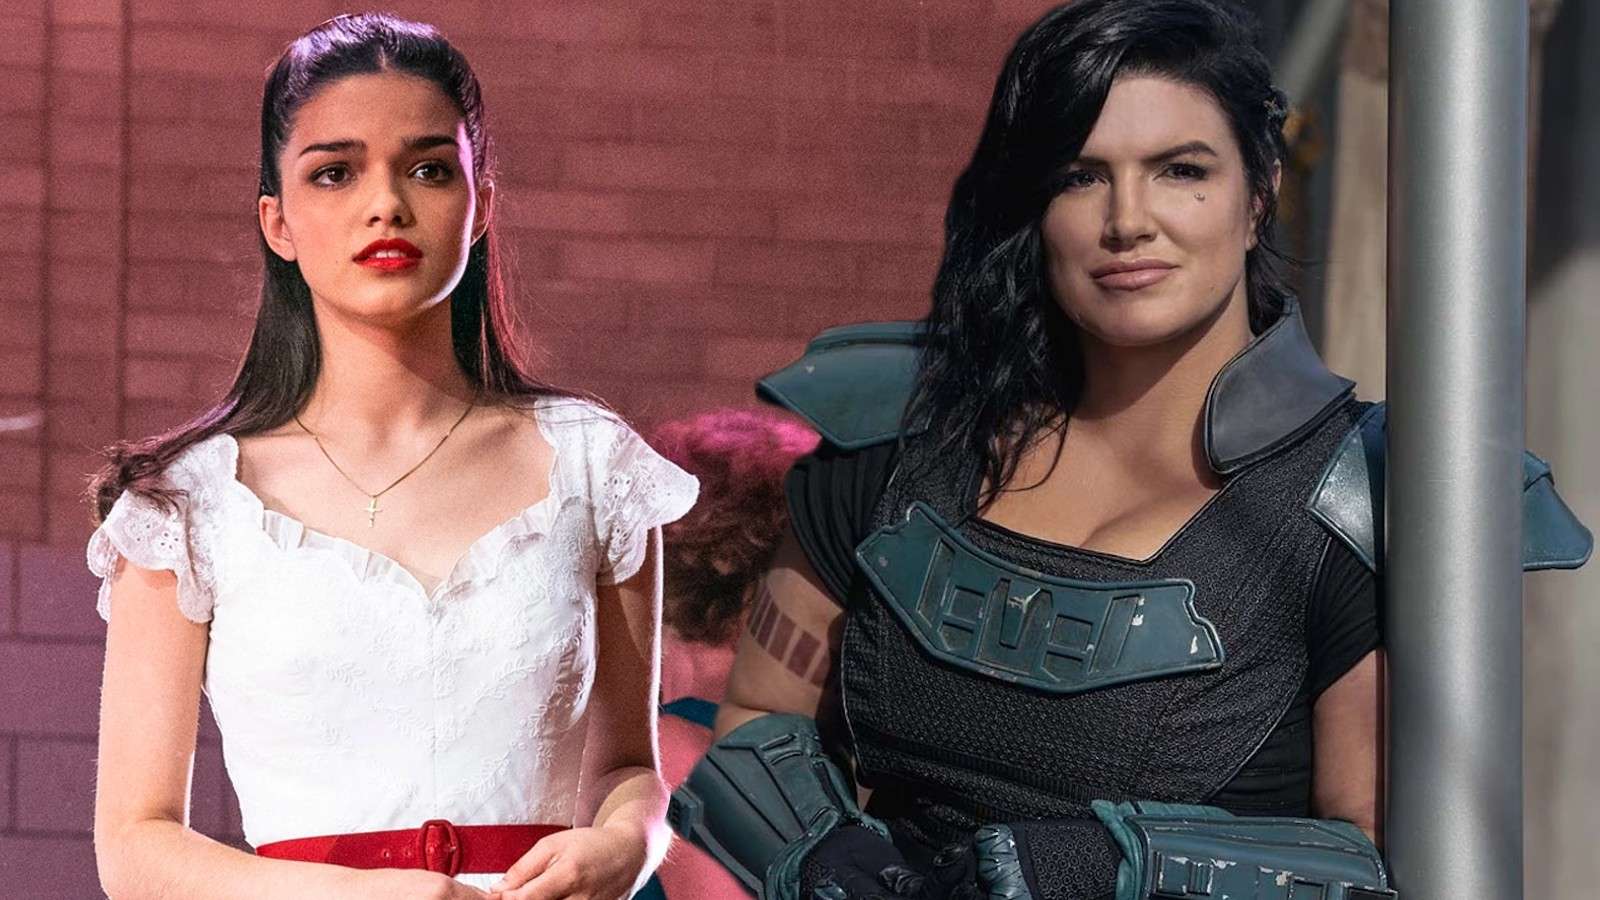 Rachel Zegler in West Side Story and Gina Carano in The Mandalorian